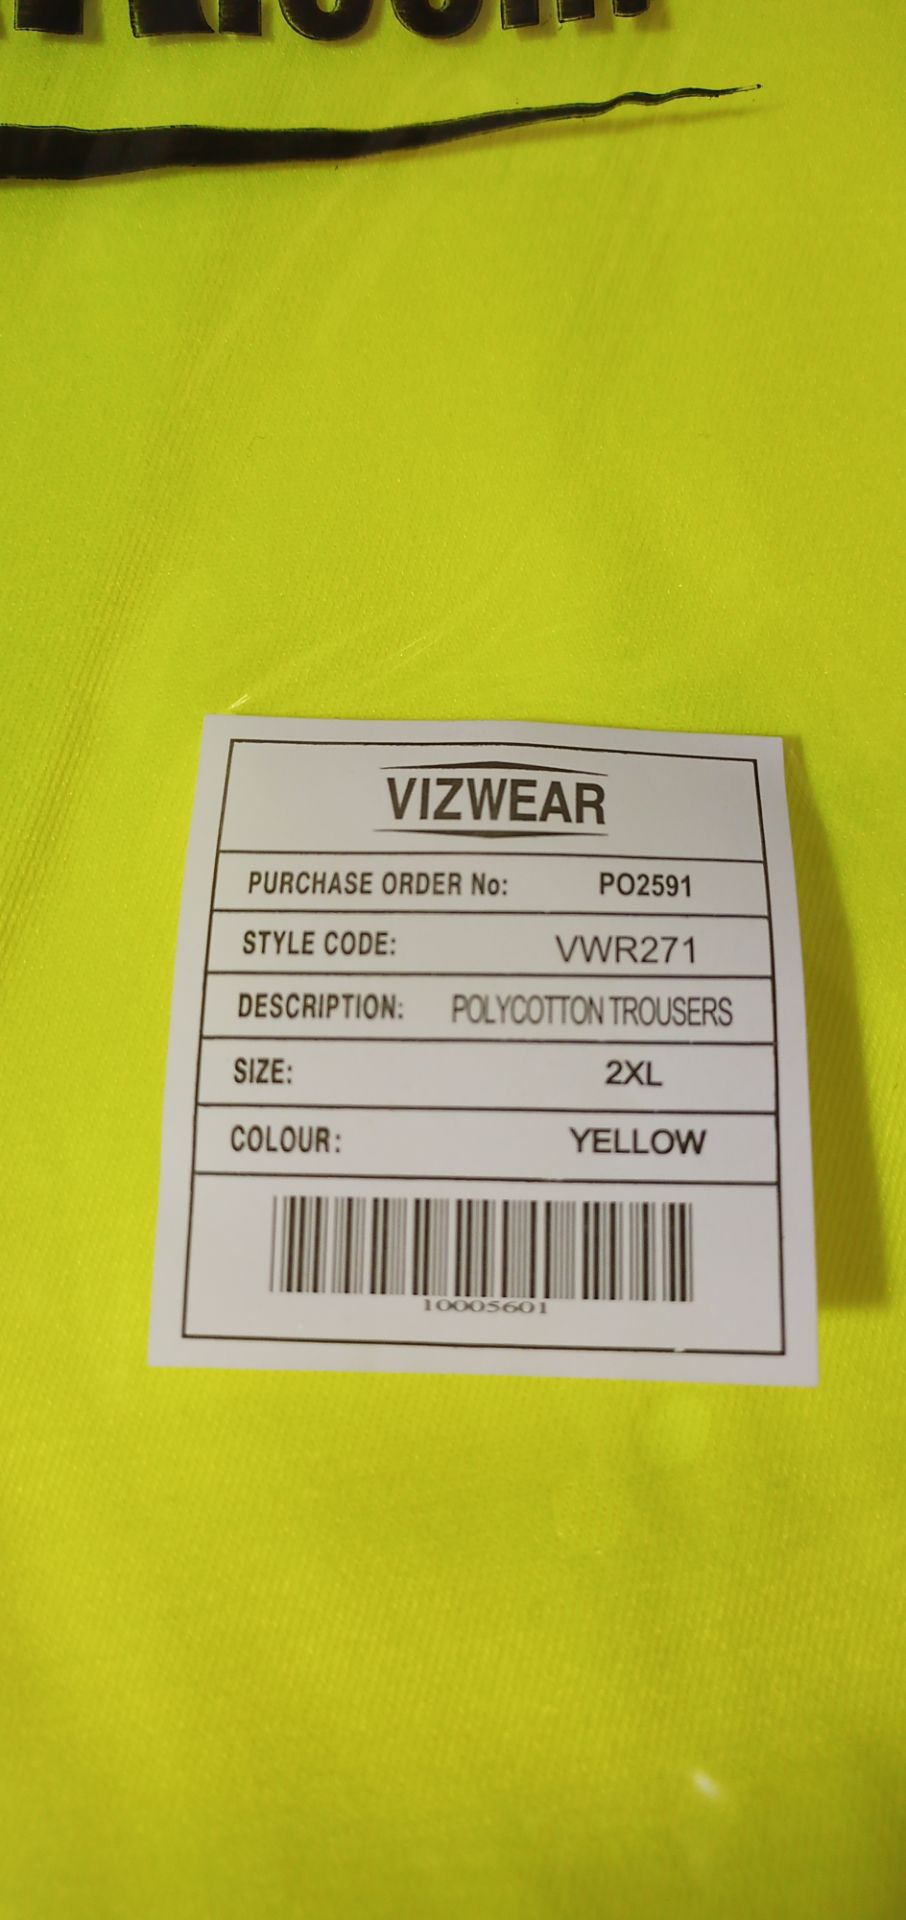 25x BRAND NEW SEALED CARTONS, SIZE 2XL CARGO TROUSERS ARE VIZWEAR BRAND *PLUS VAT* - Image 8 of 8